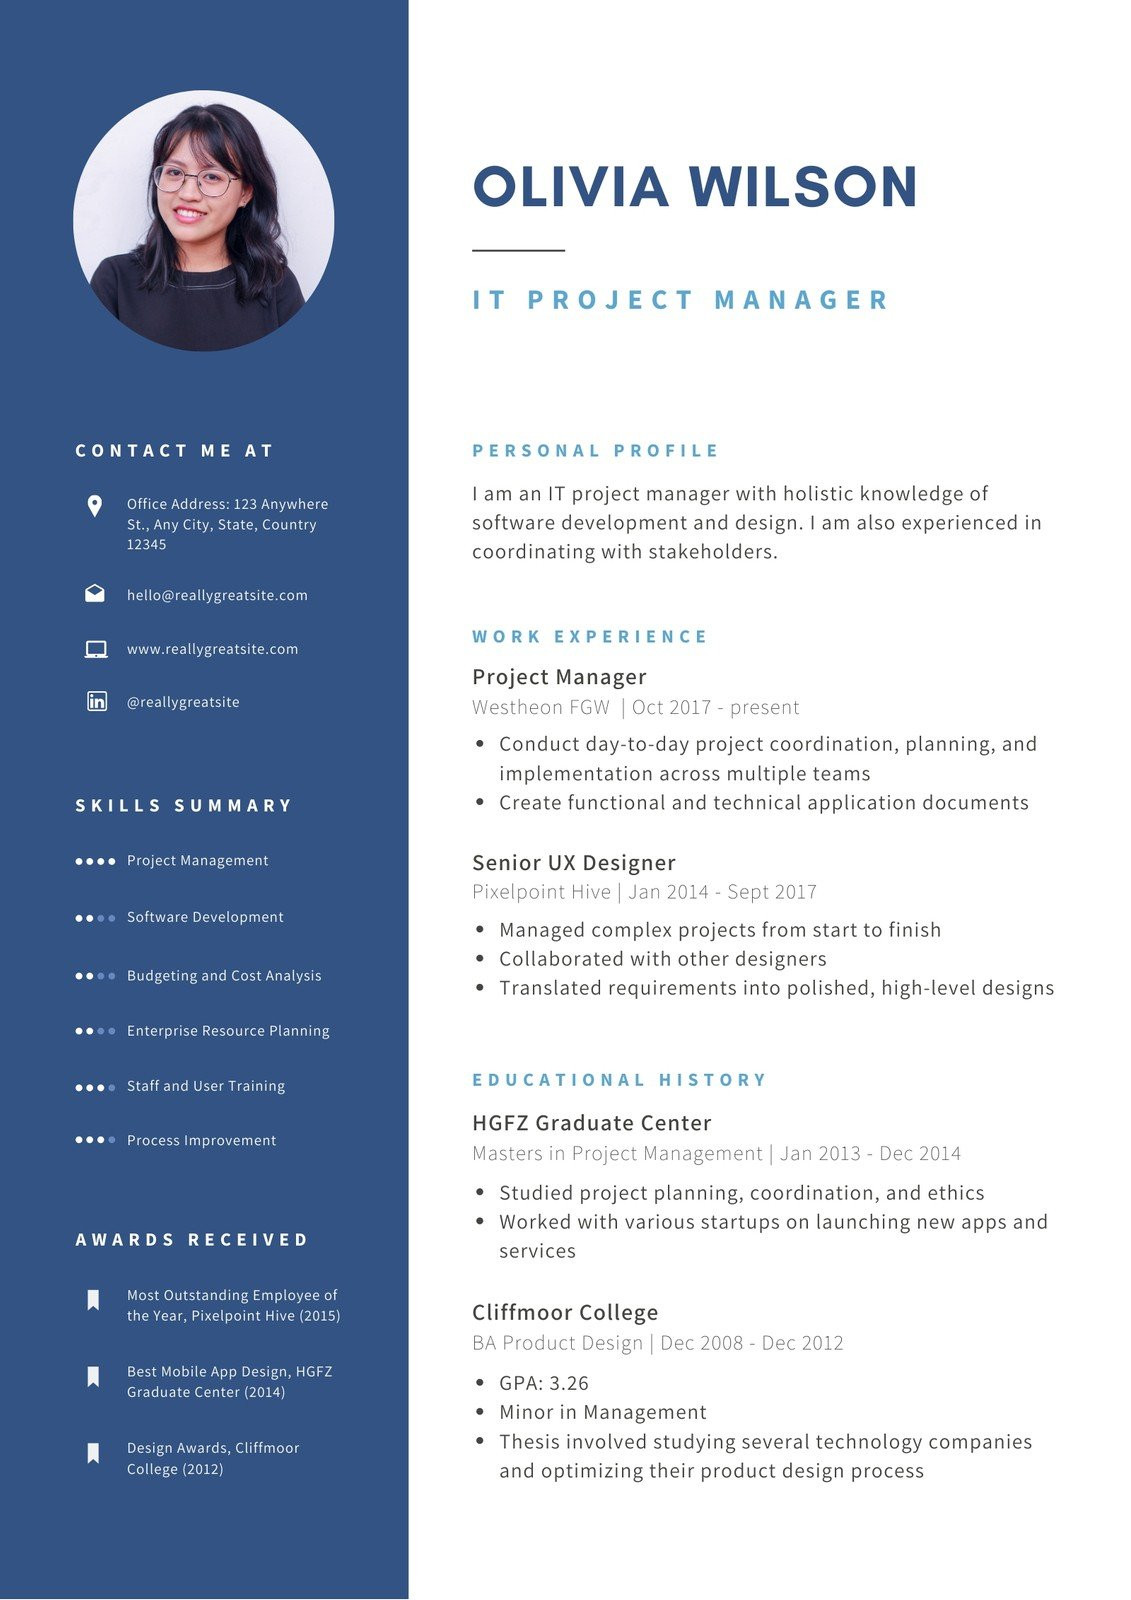 Resume Template for Freshers with Photo Free, Printable, Customizable Photo Resume Templates Canva